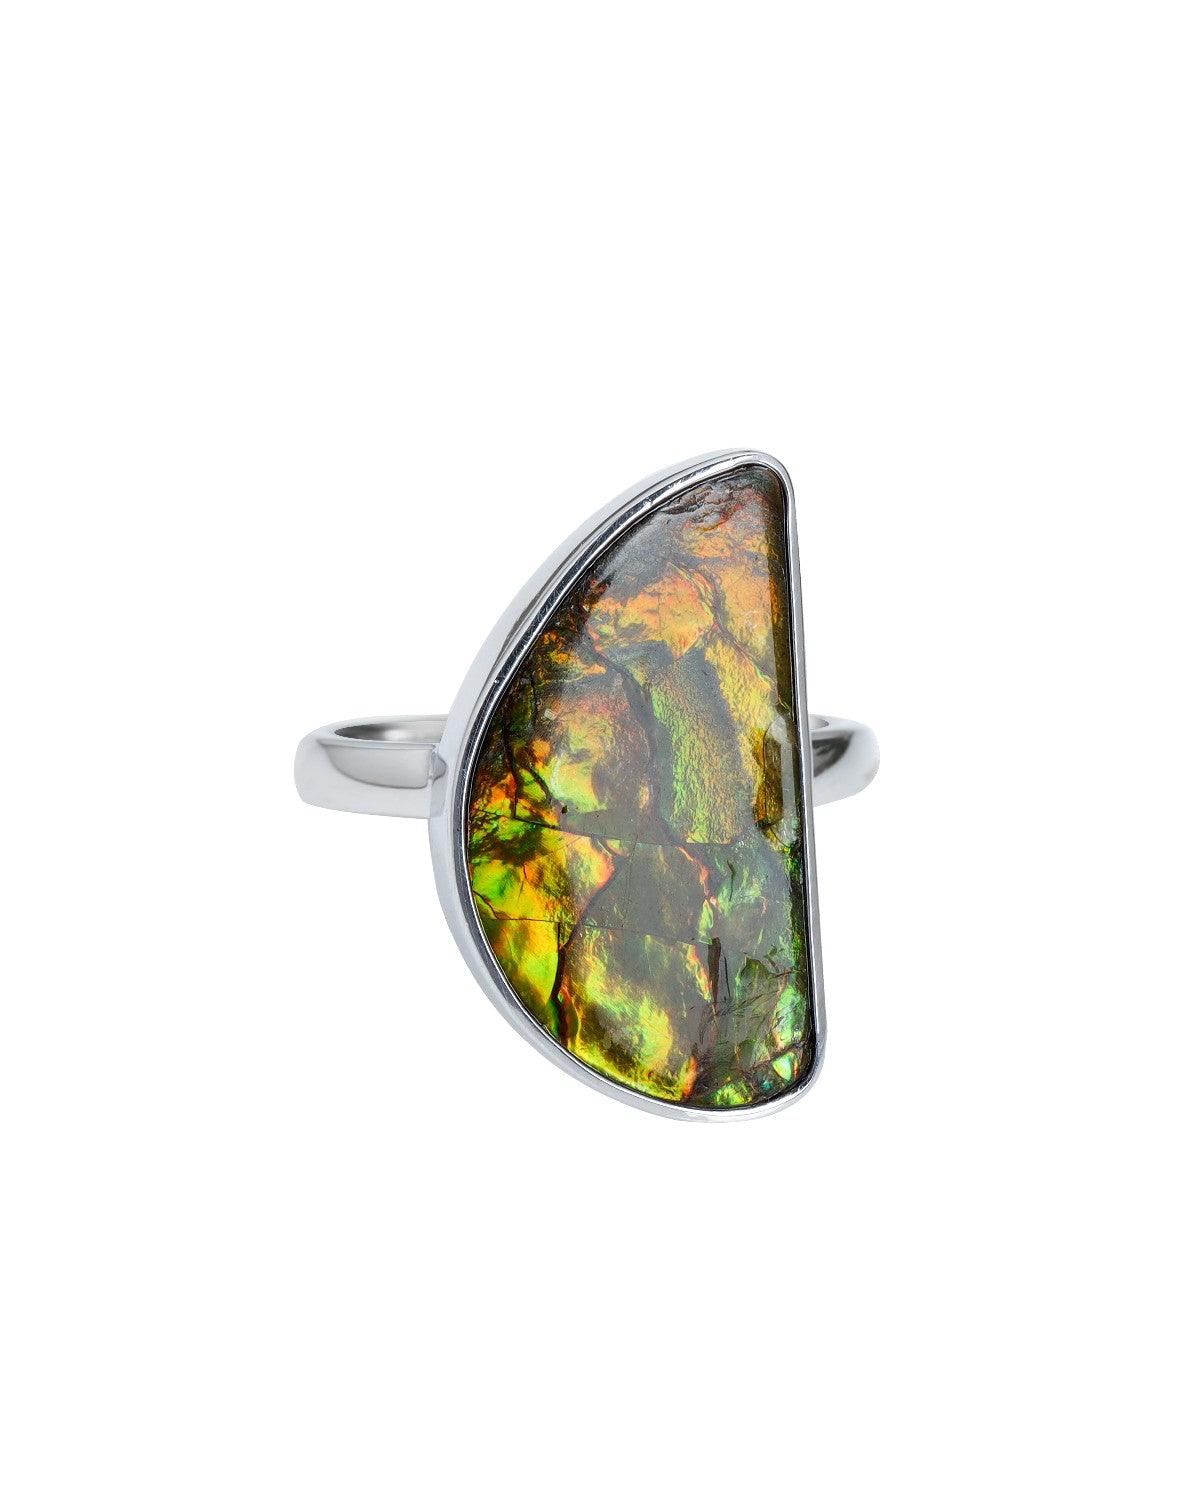 8.95 Ct Ammolite Ring Solid 925 Sterling Silver Jewelry - YoTreasure